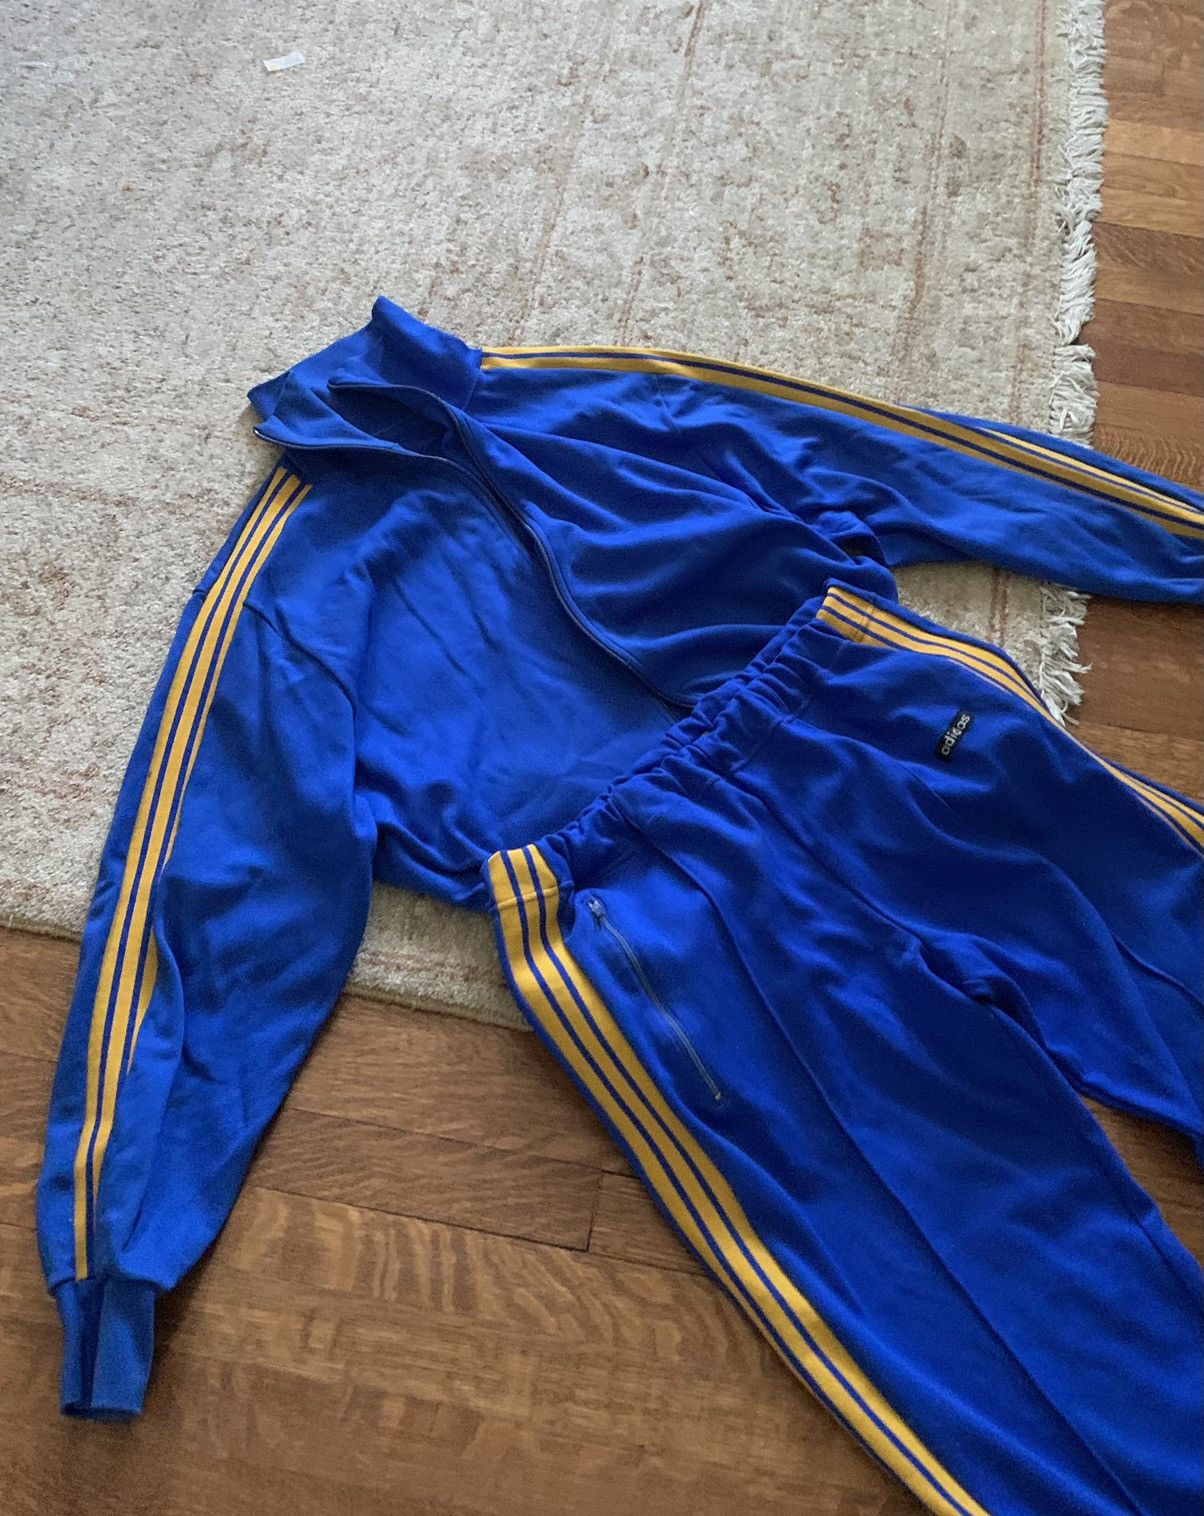 Pre-owned Adidas X Archival Clothing 1980s Adidas Tracksuit Vintage 2 Piece Sweatsuit 70's Large In Blue